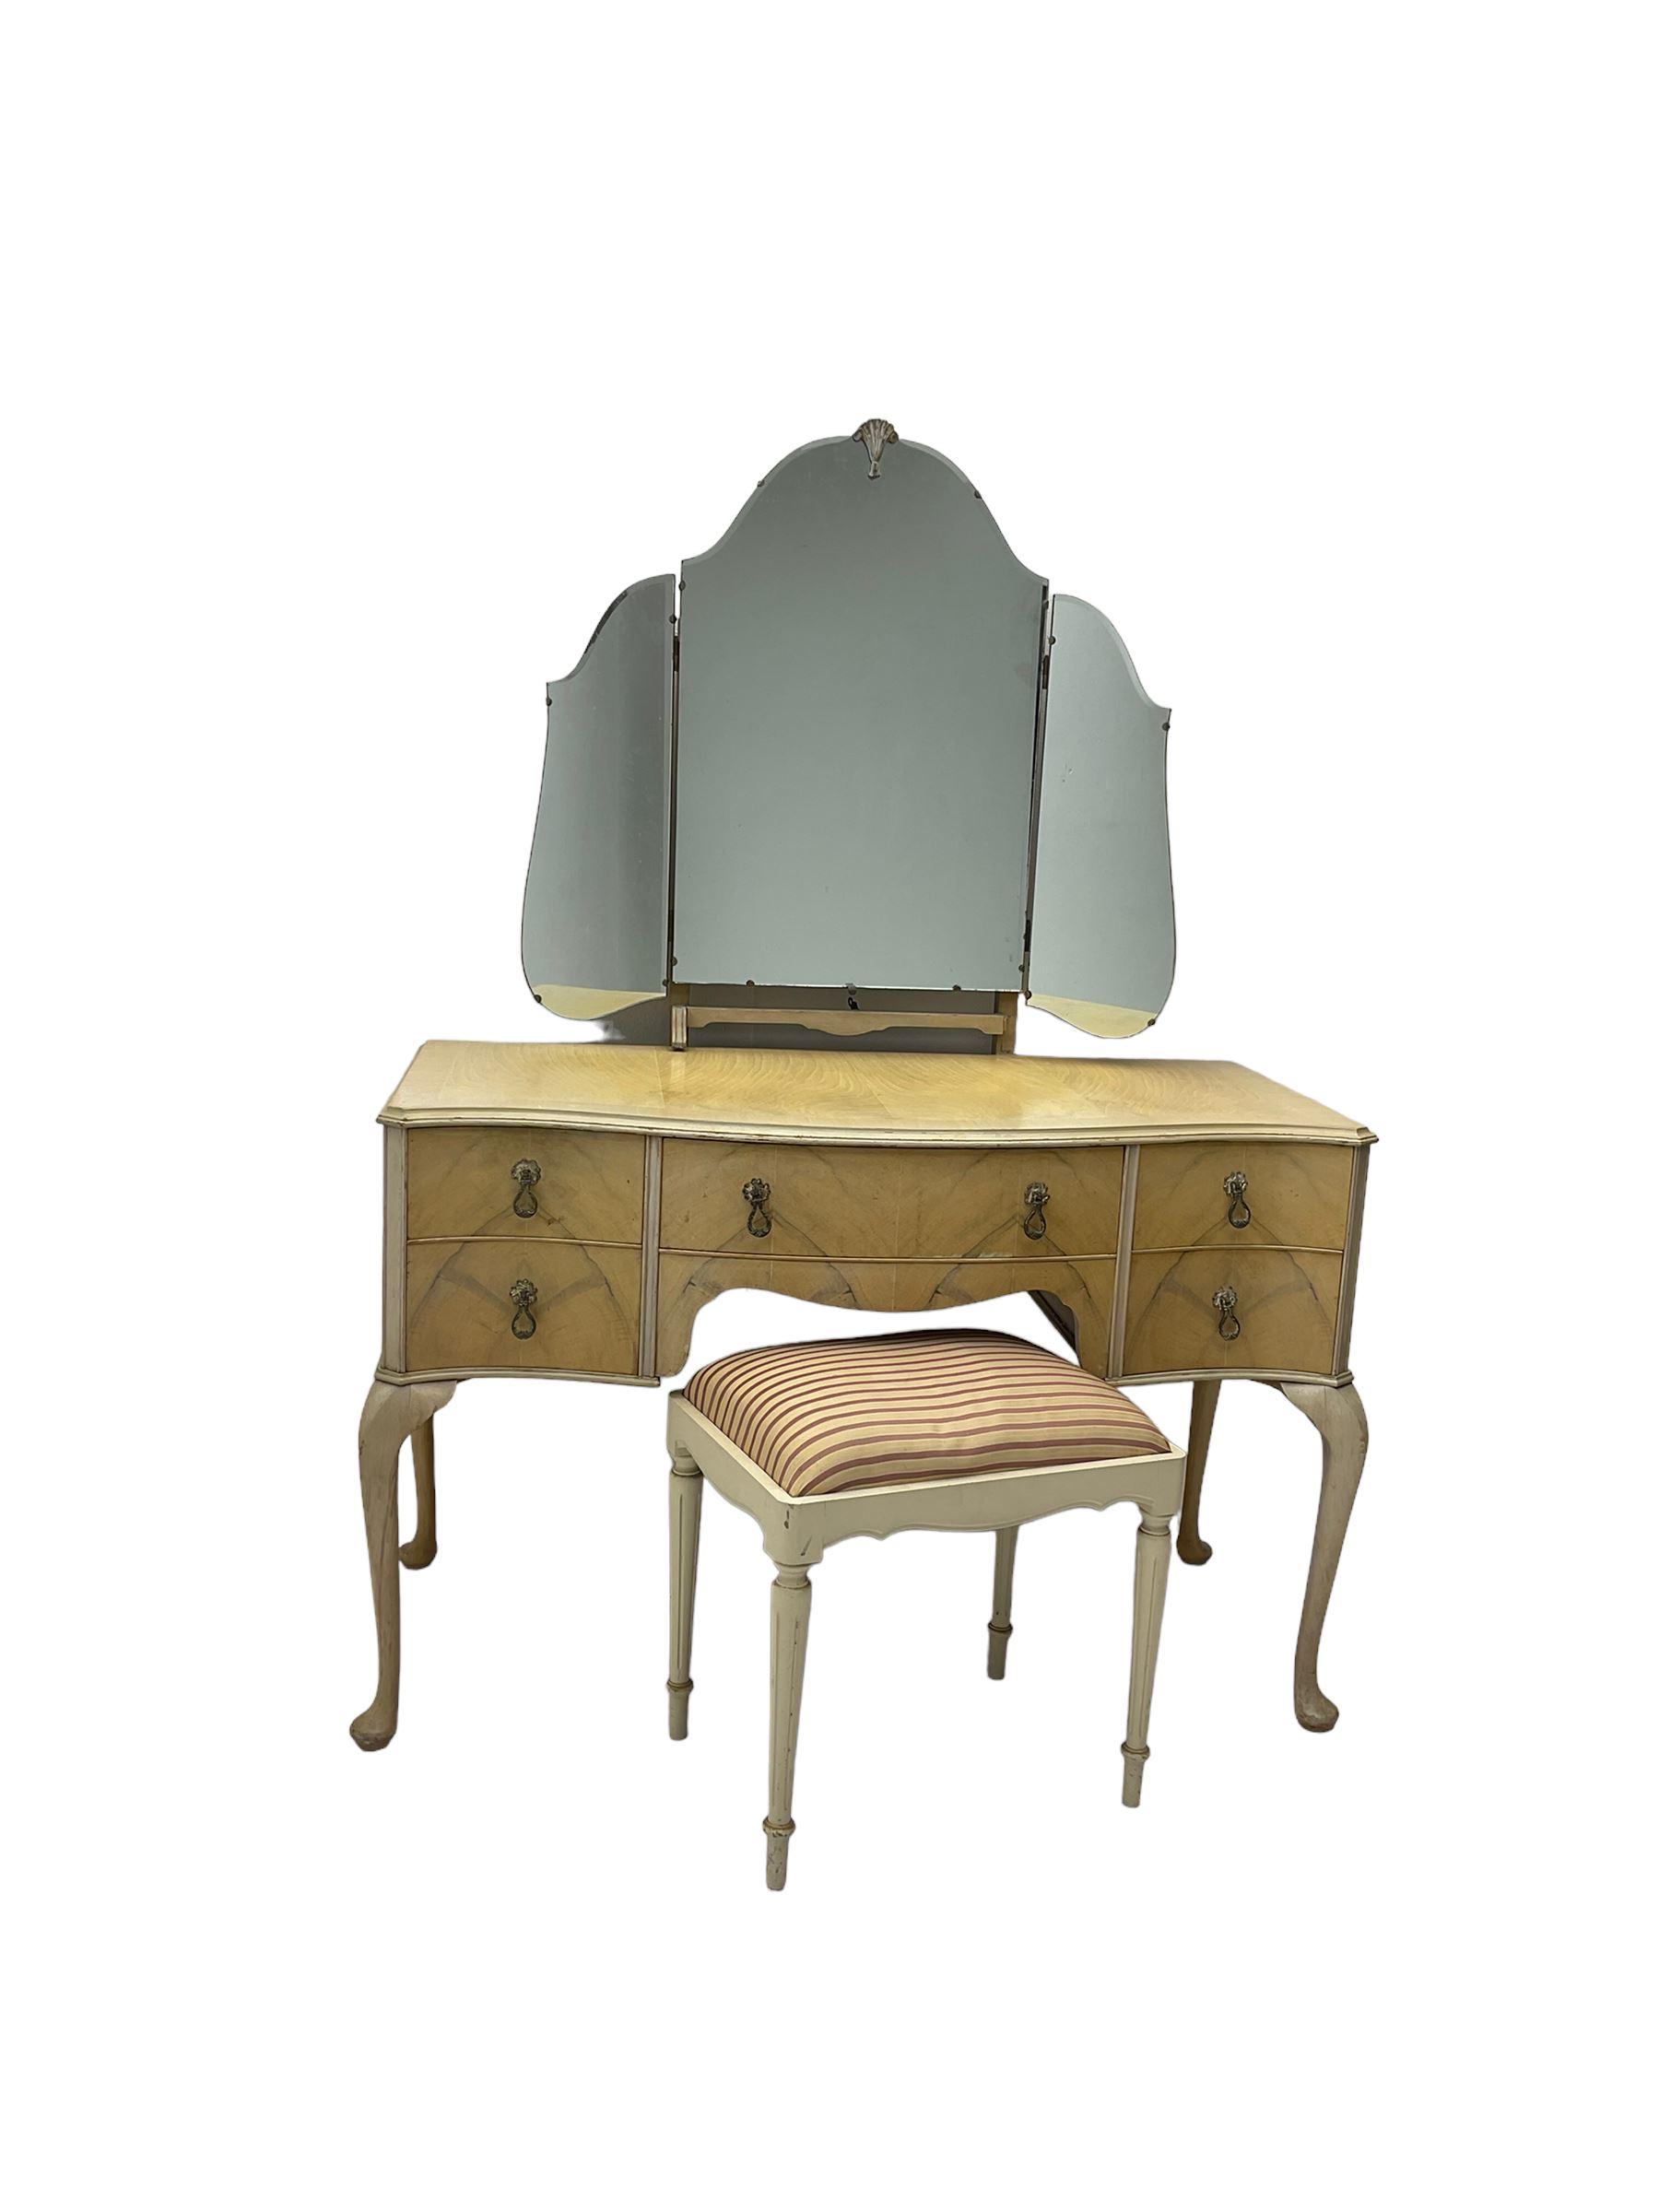 F Wrighton & Sons Ltd - French style painted serpentine dressing table - Image 8 of 11